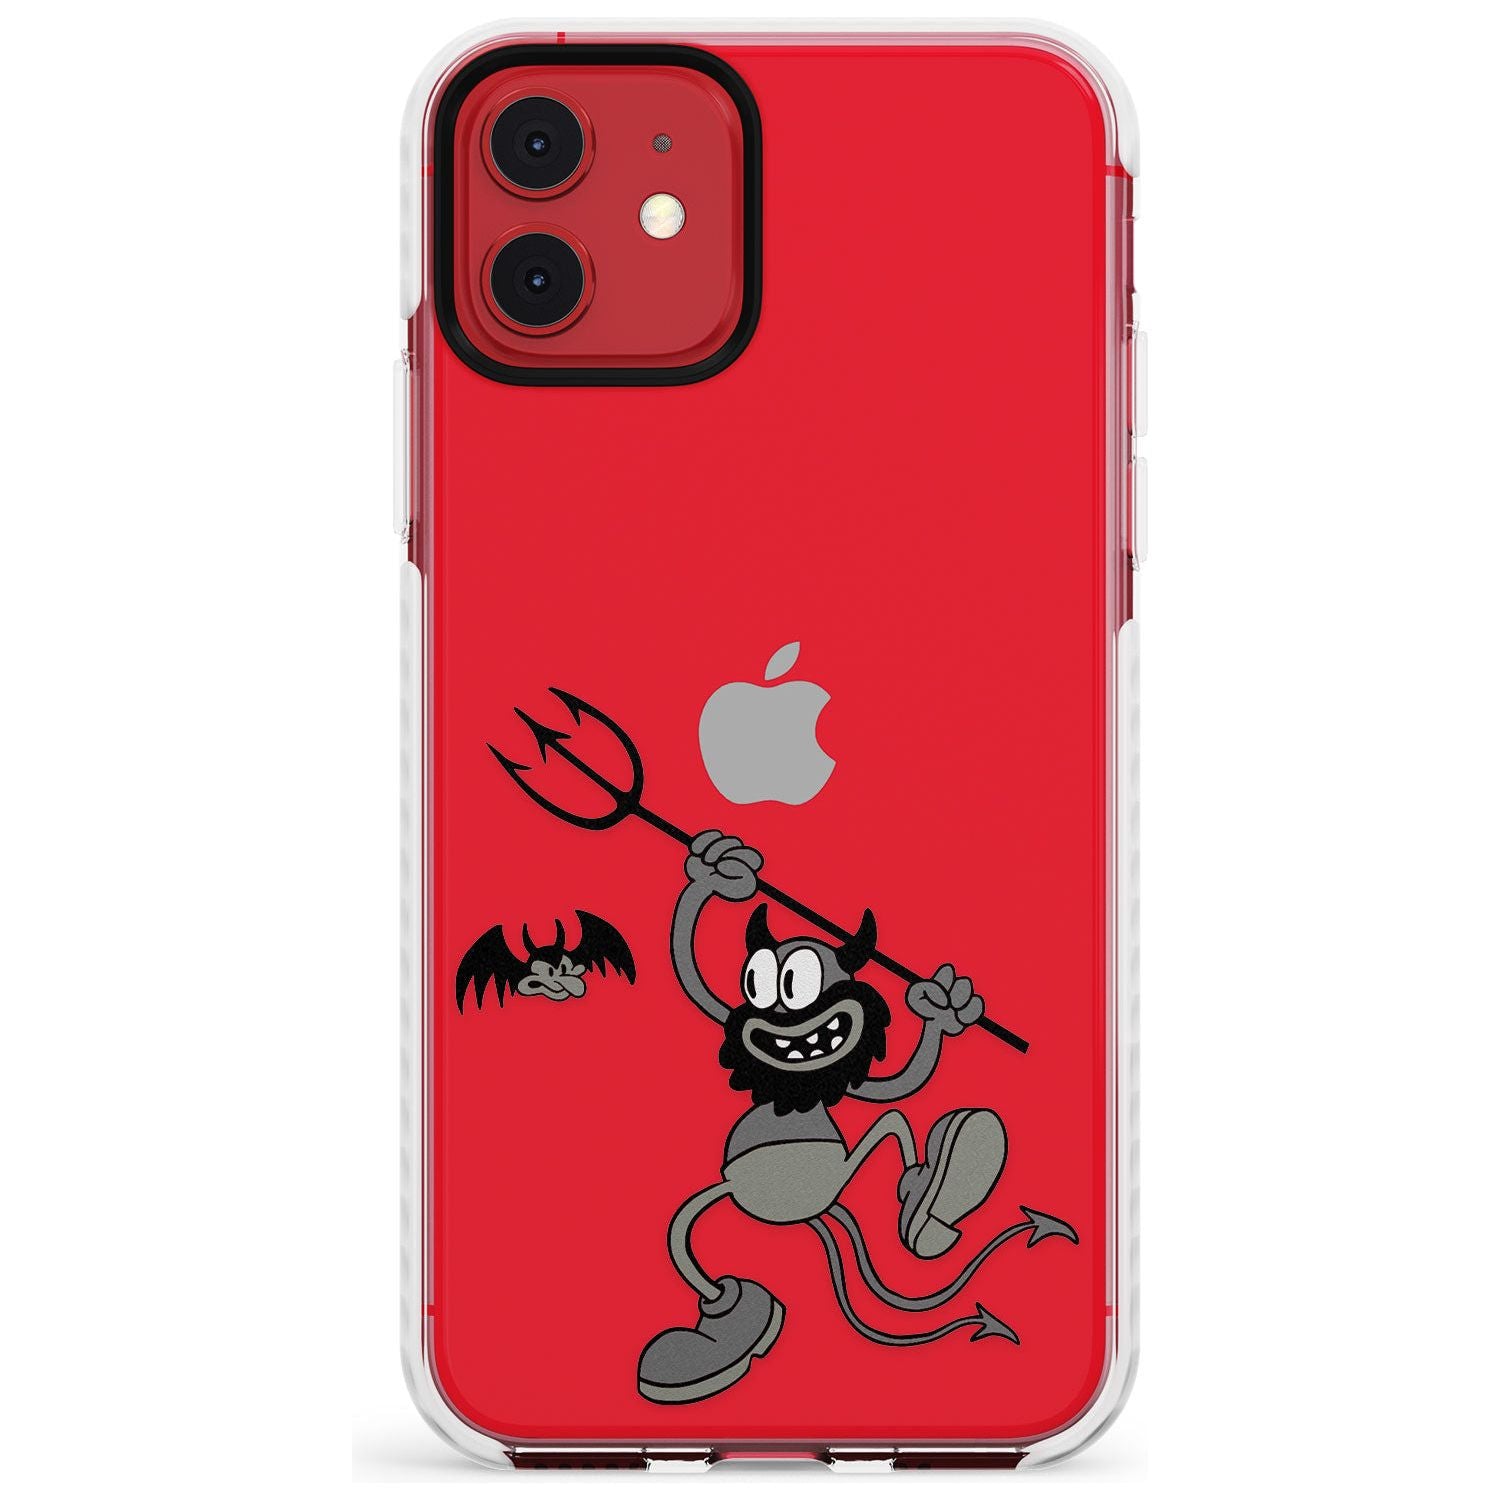 Dancing Devil Impact Phone Case for iPhone 11